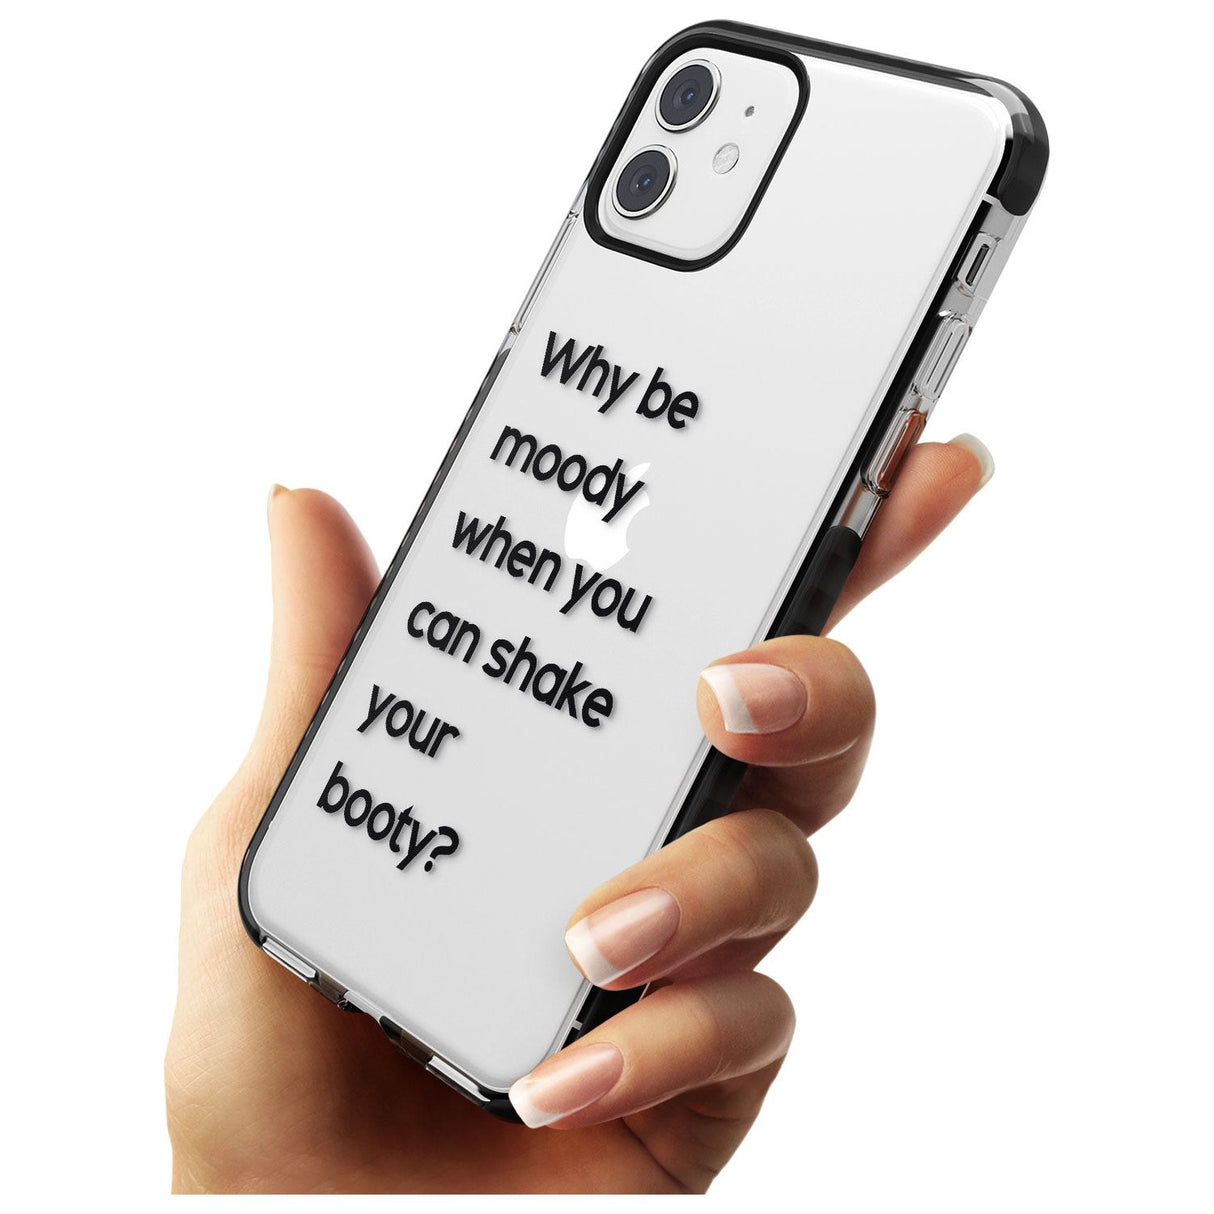 Why be moody? Pink Fade Impact Phone Case for iPhone 11 Pro Max